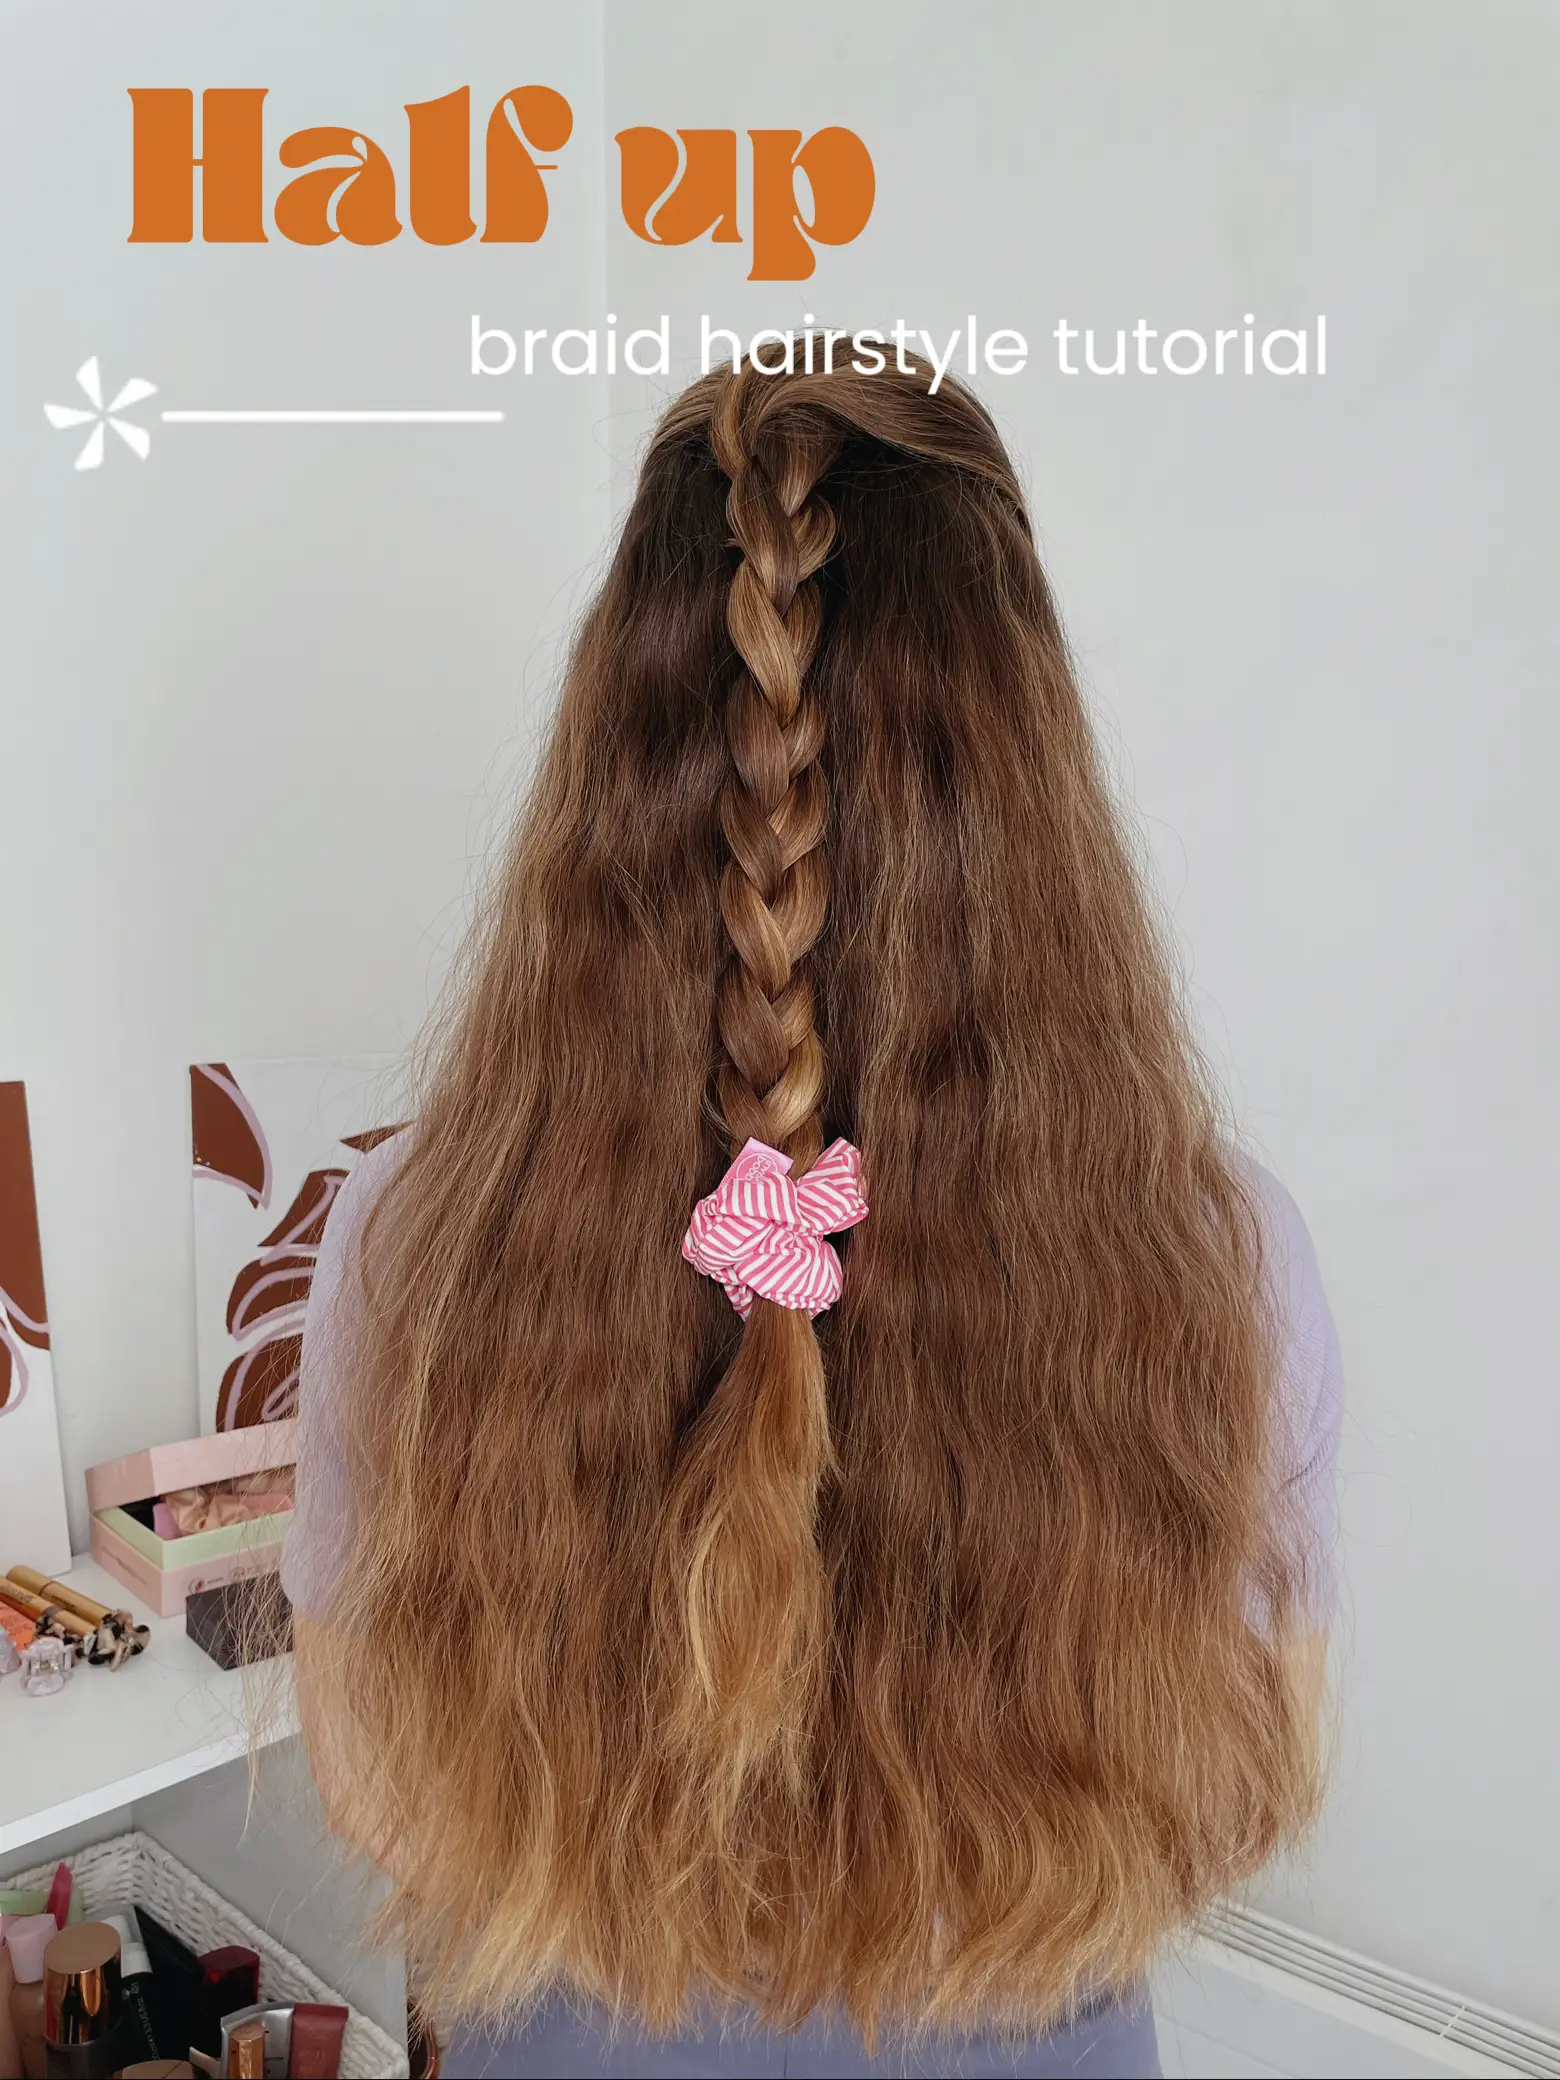 Half up braid hairstyle tutorial 💘🫶, Video published by Lauren Carmen